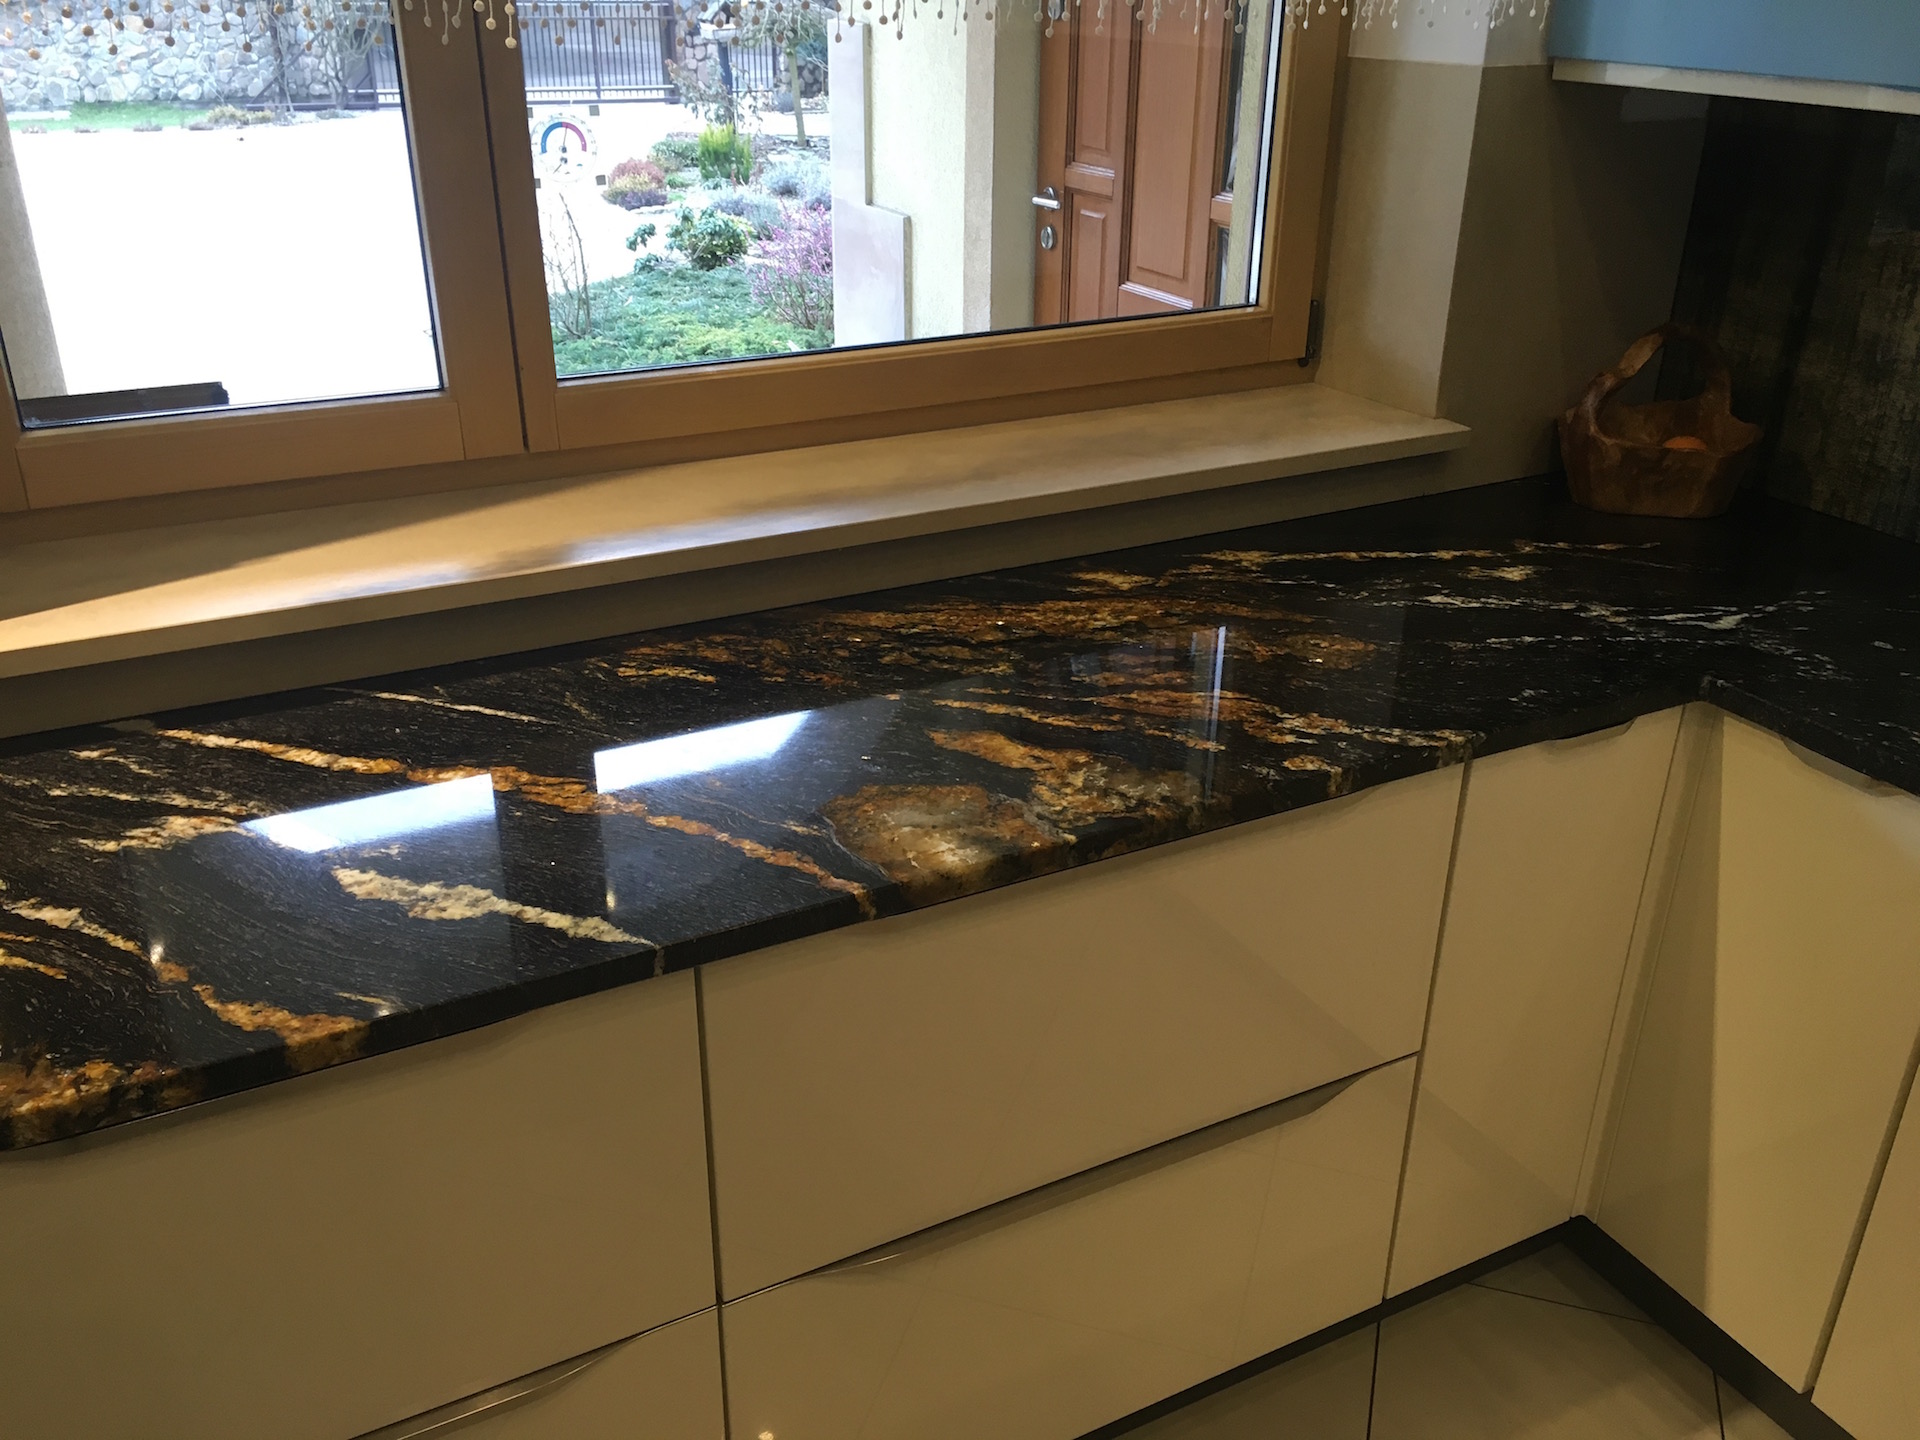 Which is the best material for kitchen worktops? KrakStone